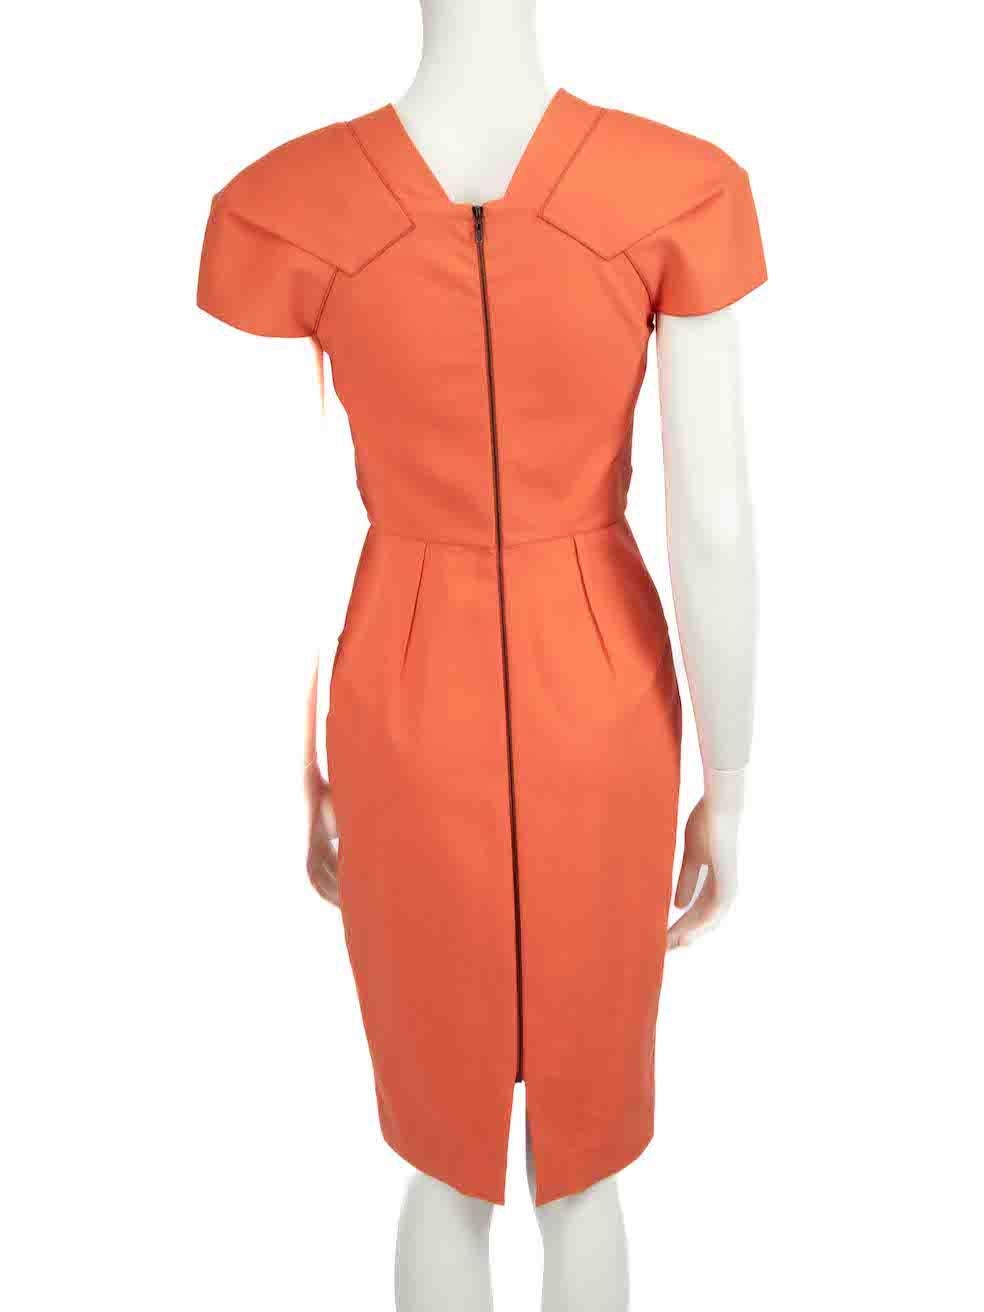 Roland Mouret Coral Geometric Cut Square Neck Dress Size S In Good Condition For Sale In London, GB